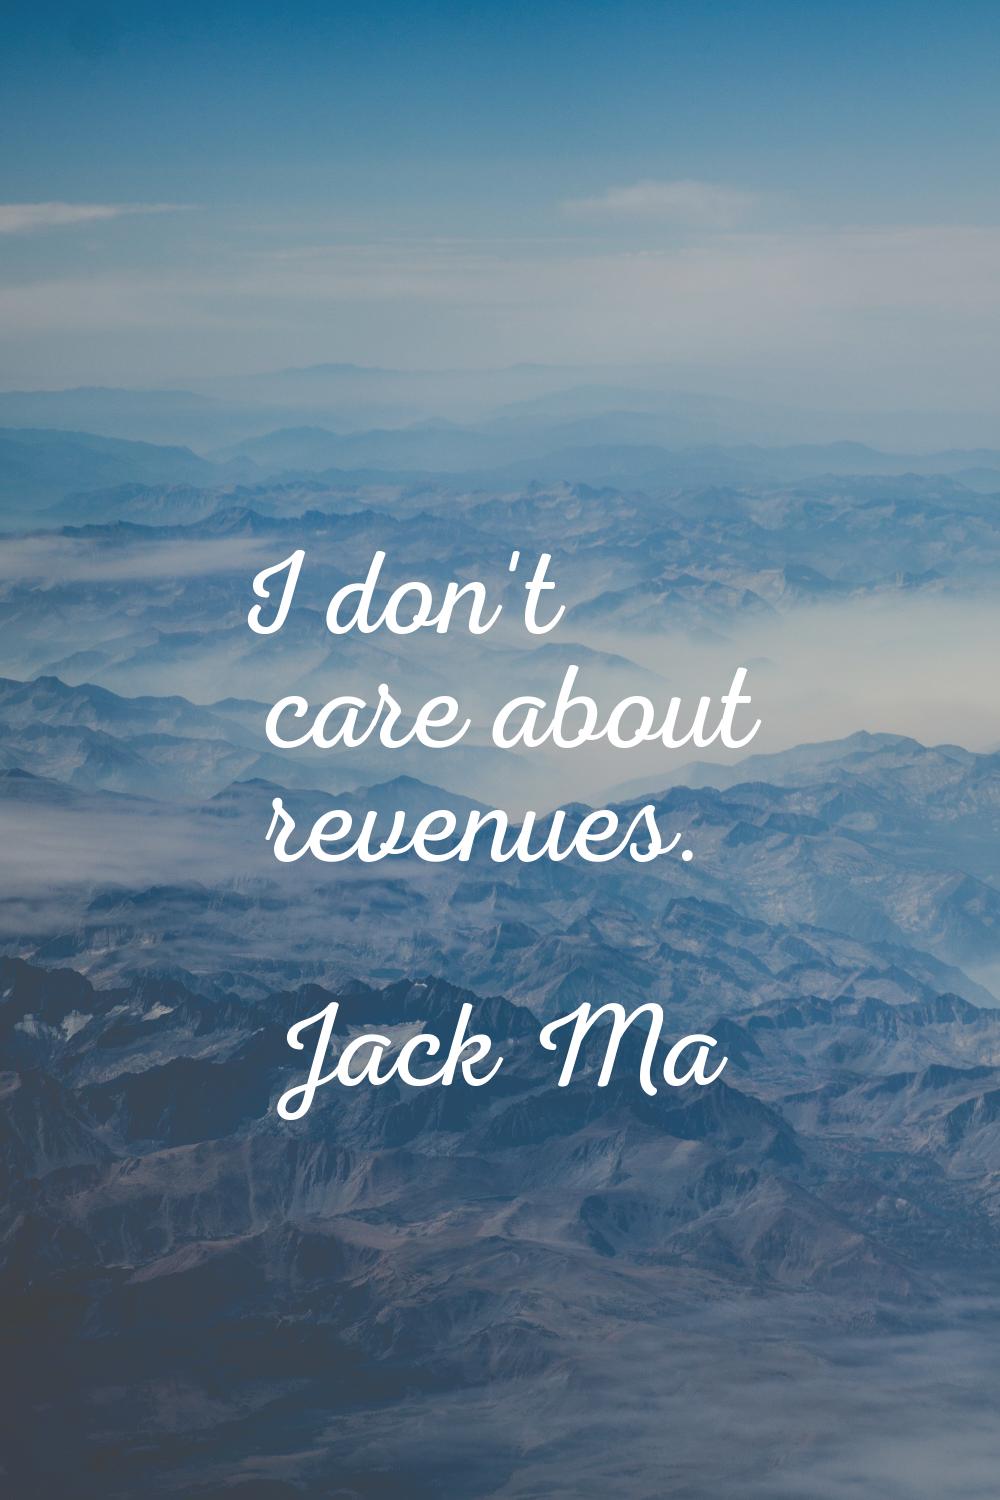 I don't care about revenues.